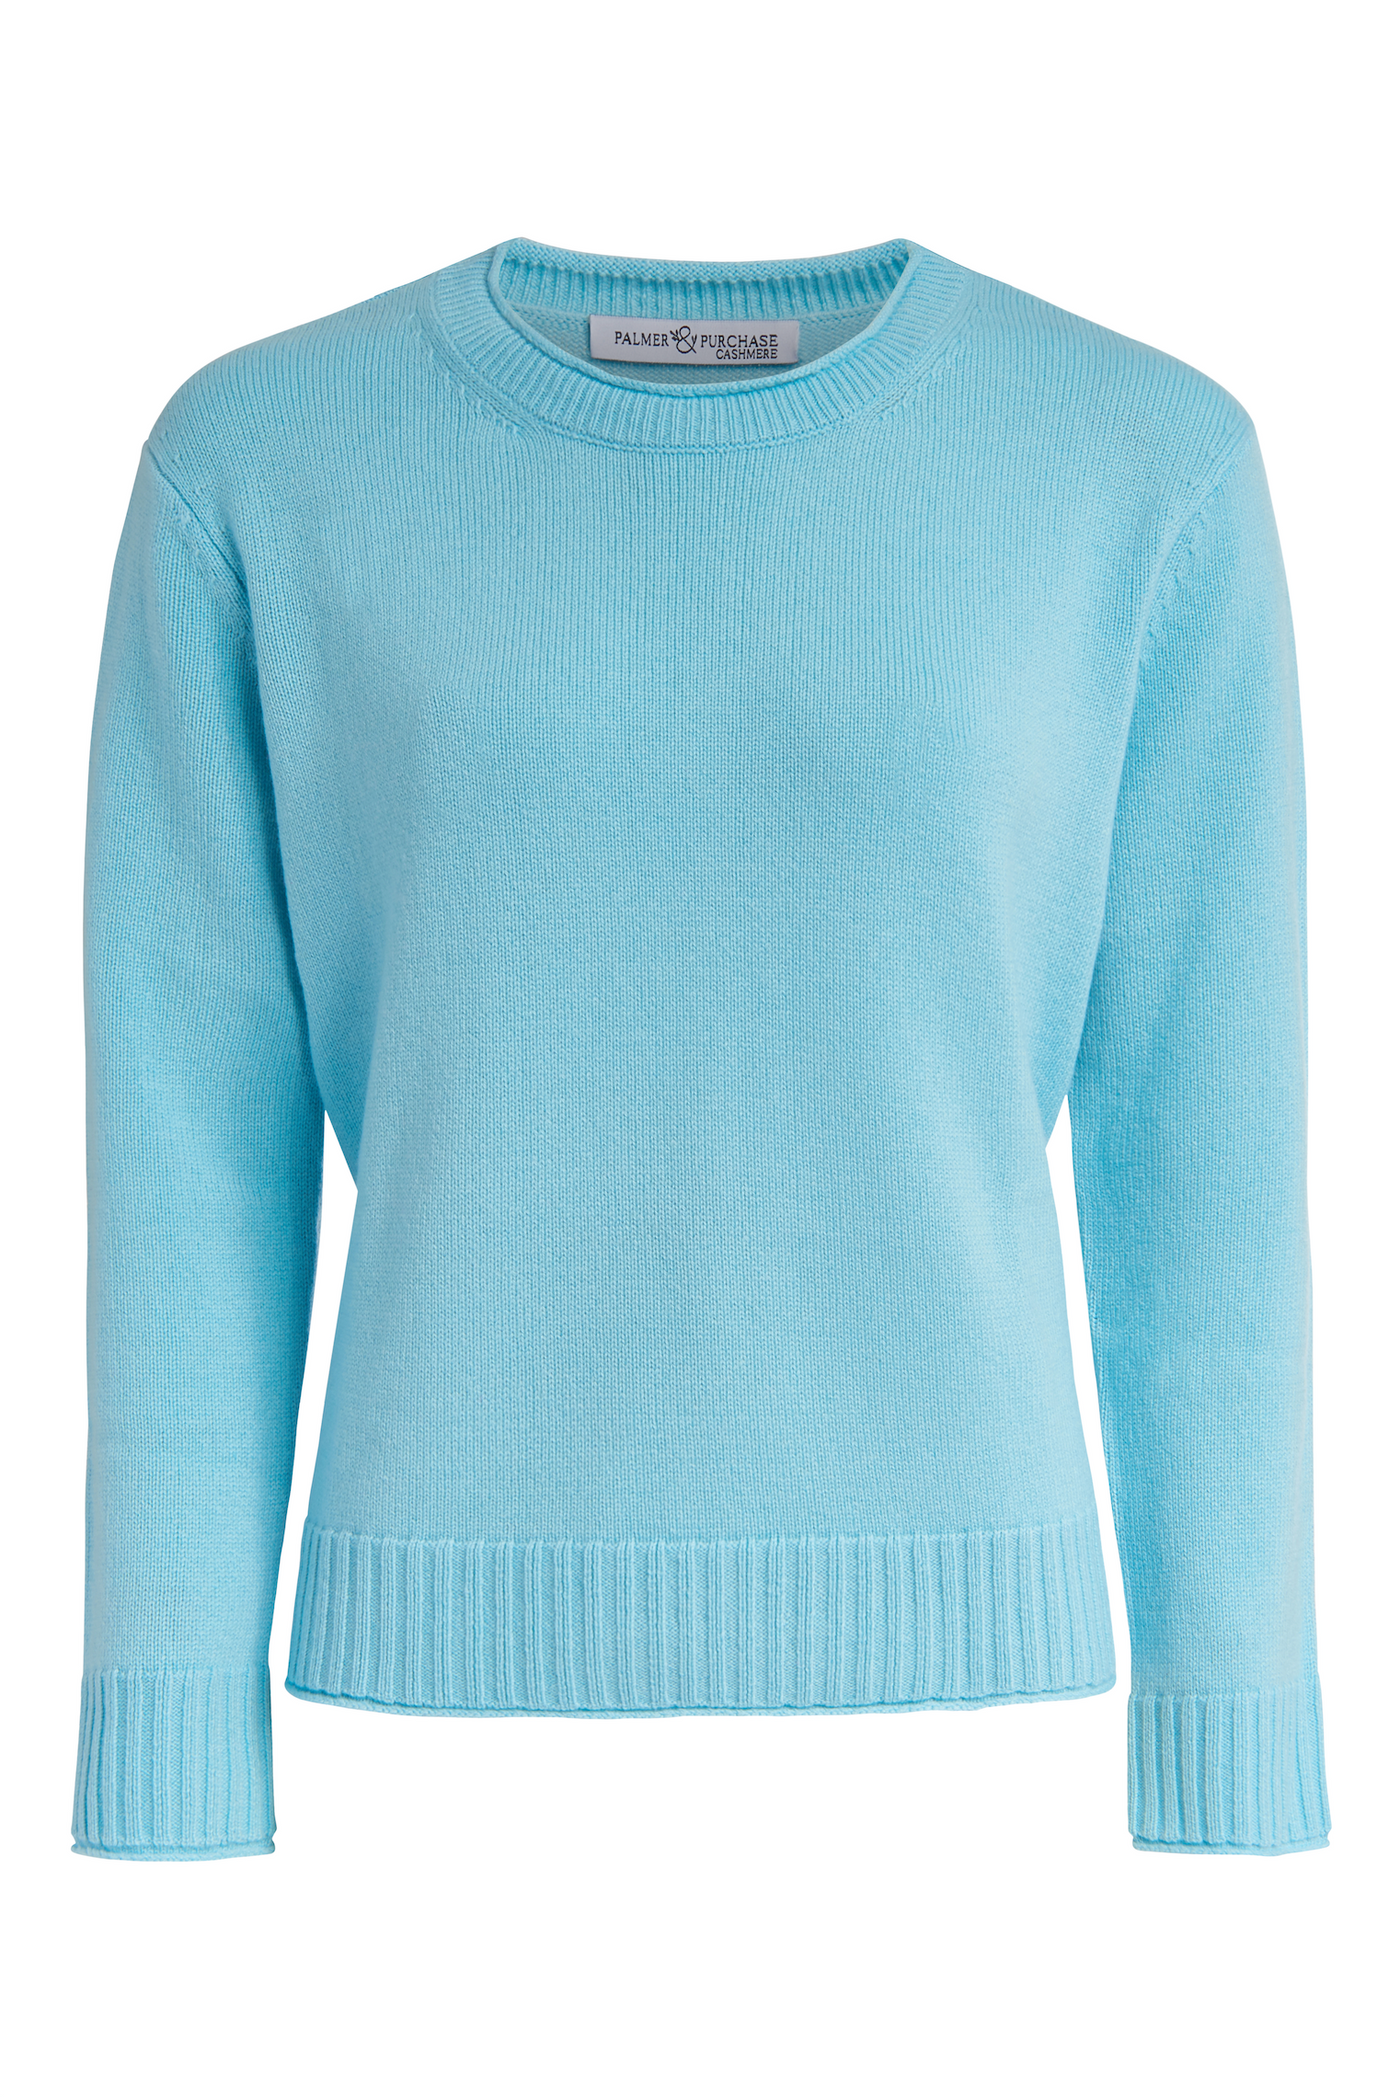 The Shelly Pullover- Aquila